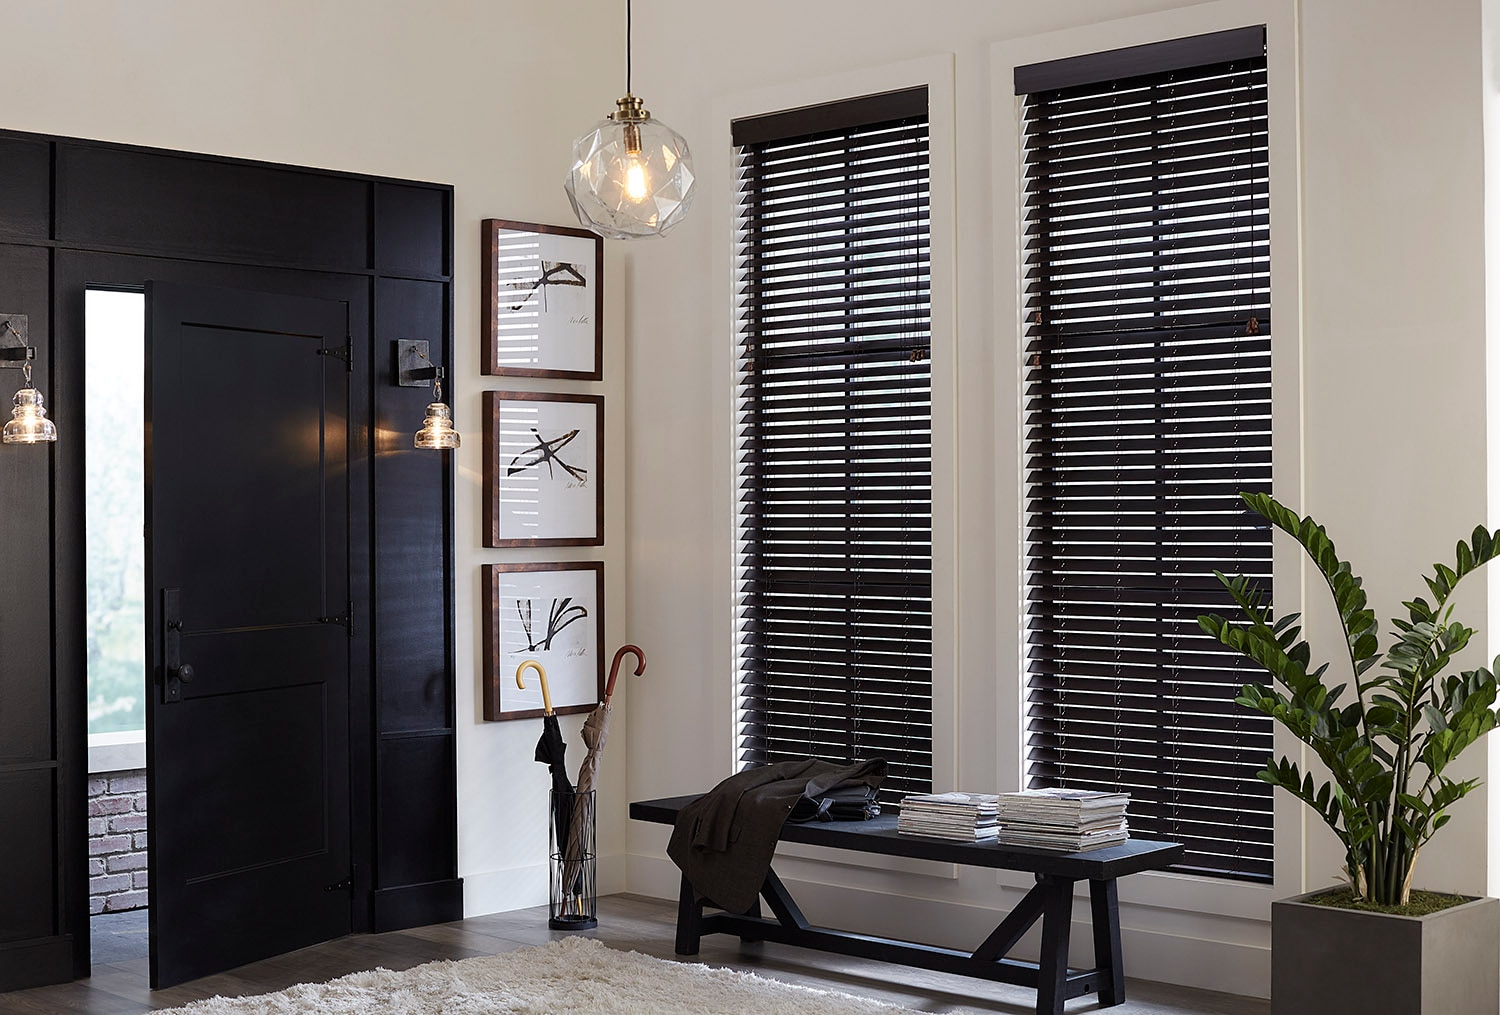 BLACK Pvc Venetian Blinds Easy Fit Trimmable Home & Office Blinds 